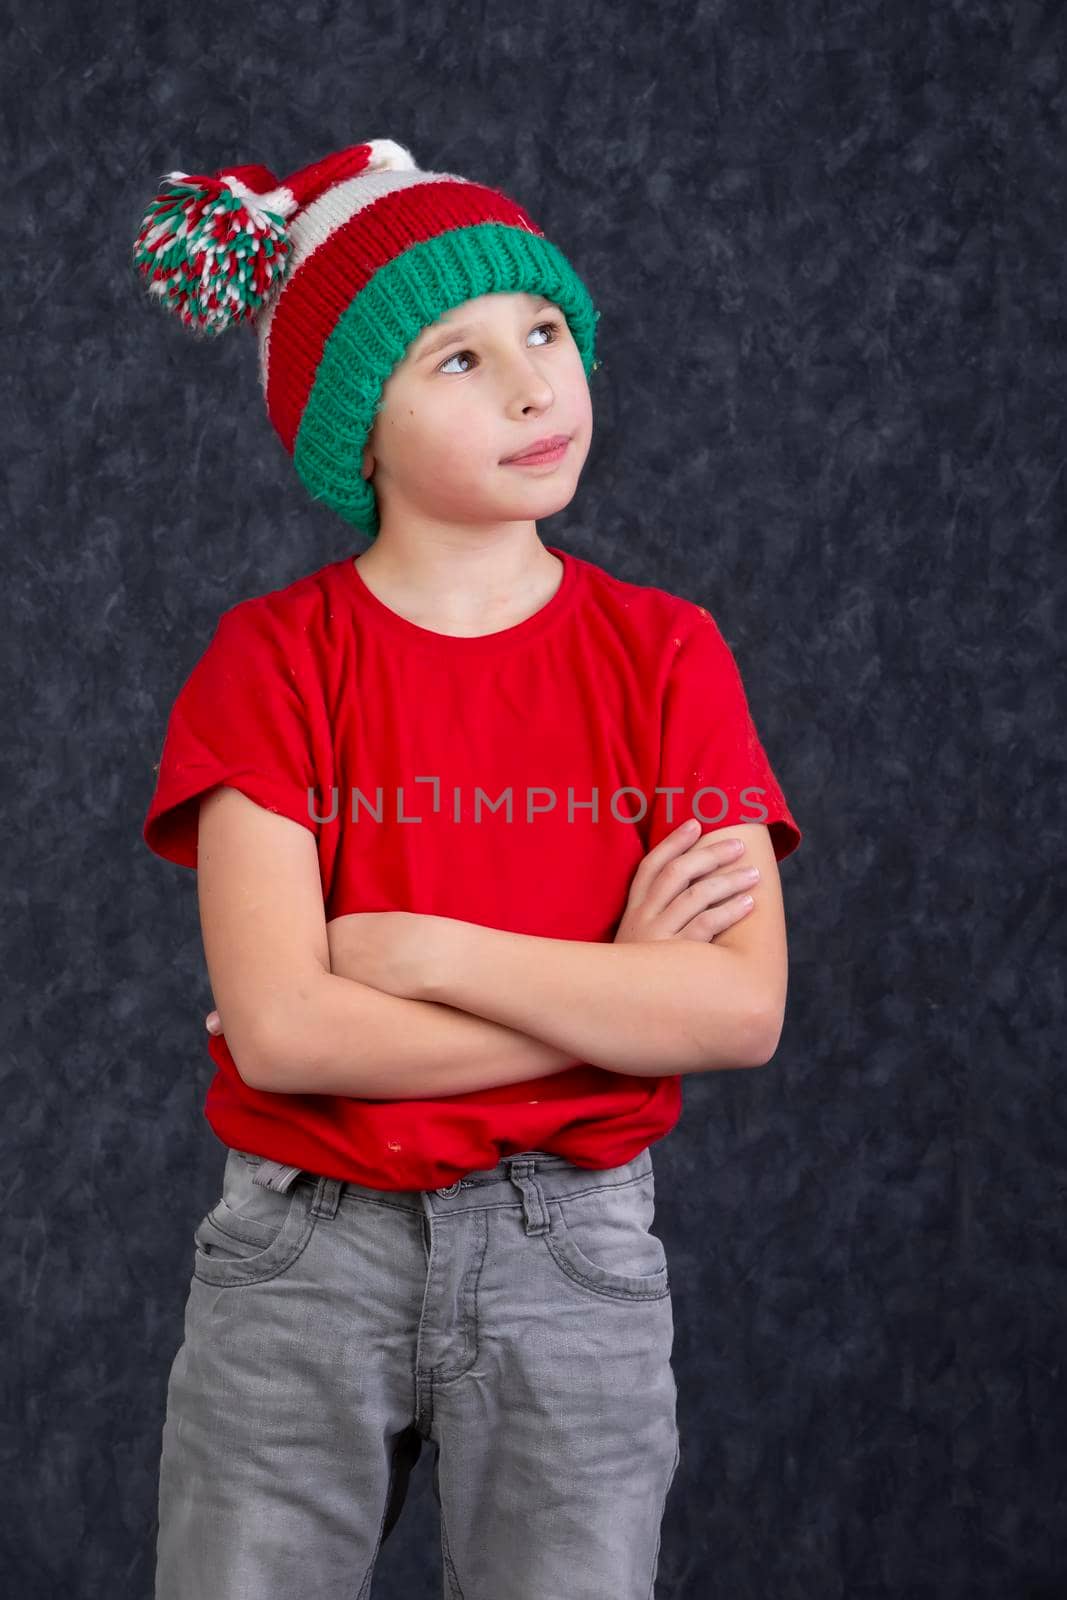 Funny little boy in a knitted Christmas hat on a gray background.